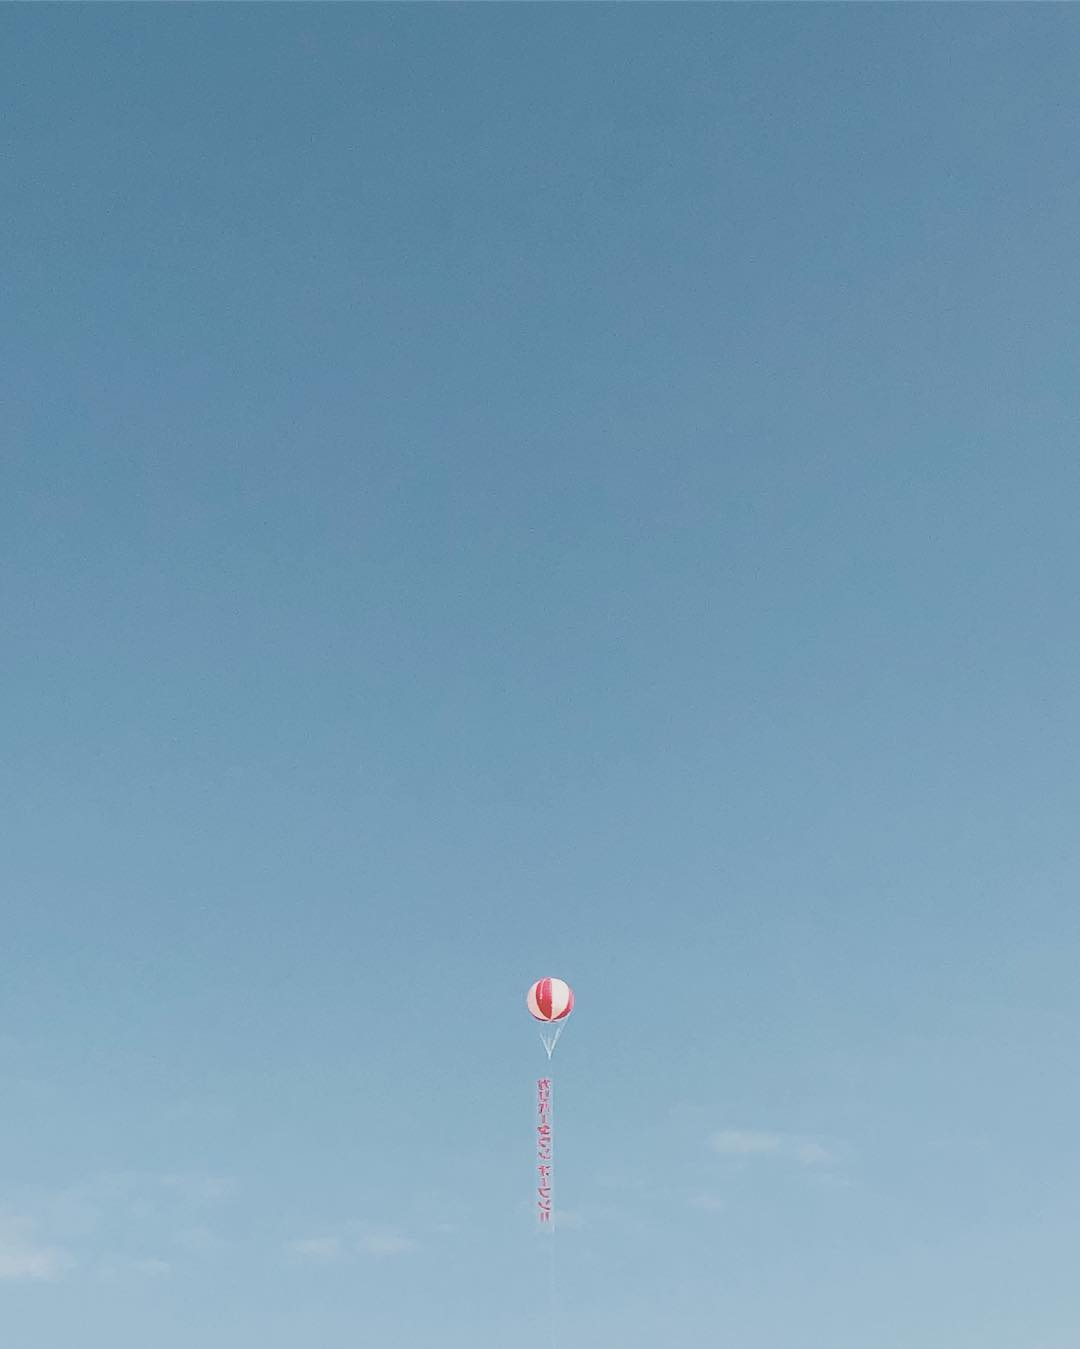 Balloon floating in the air